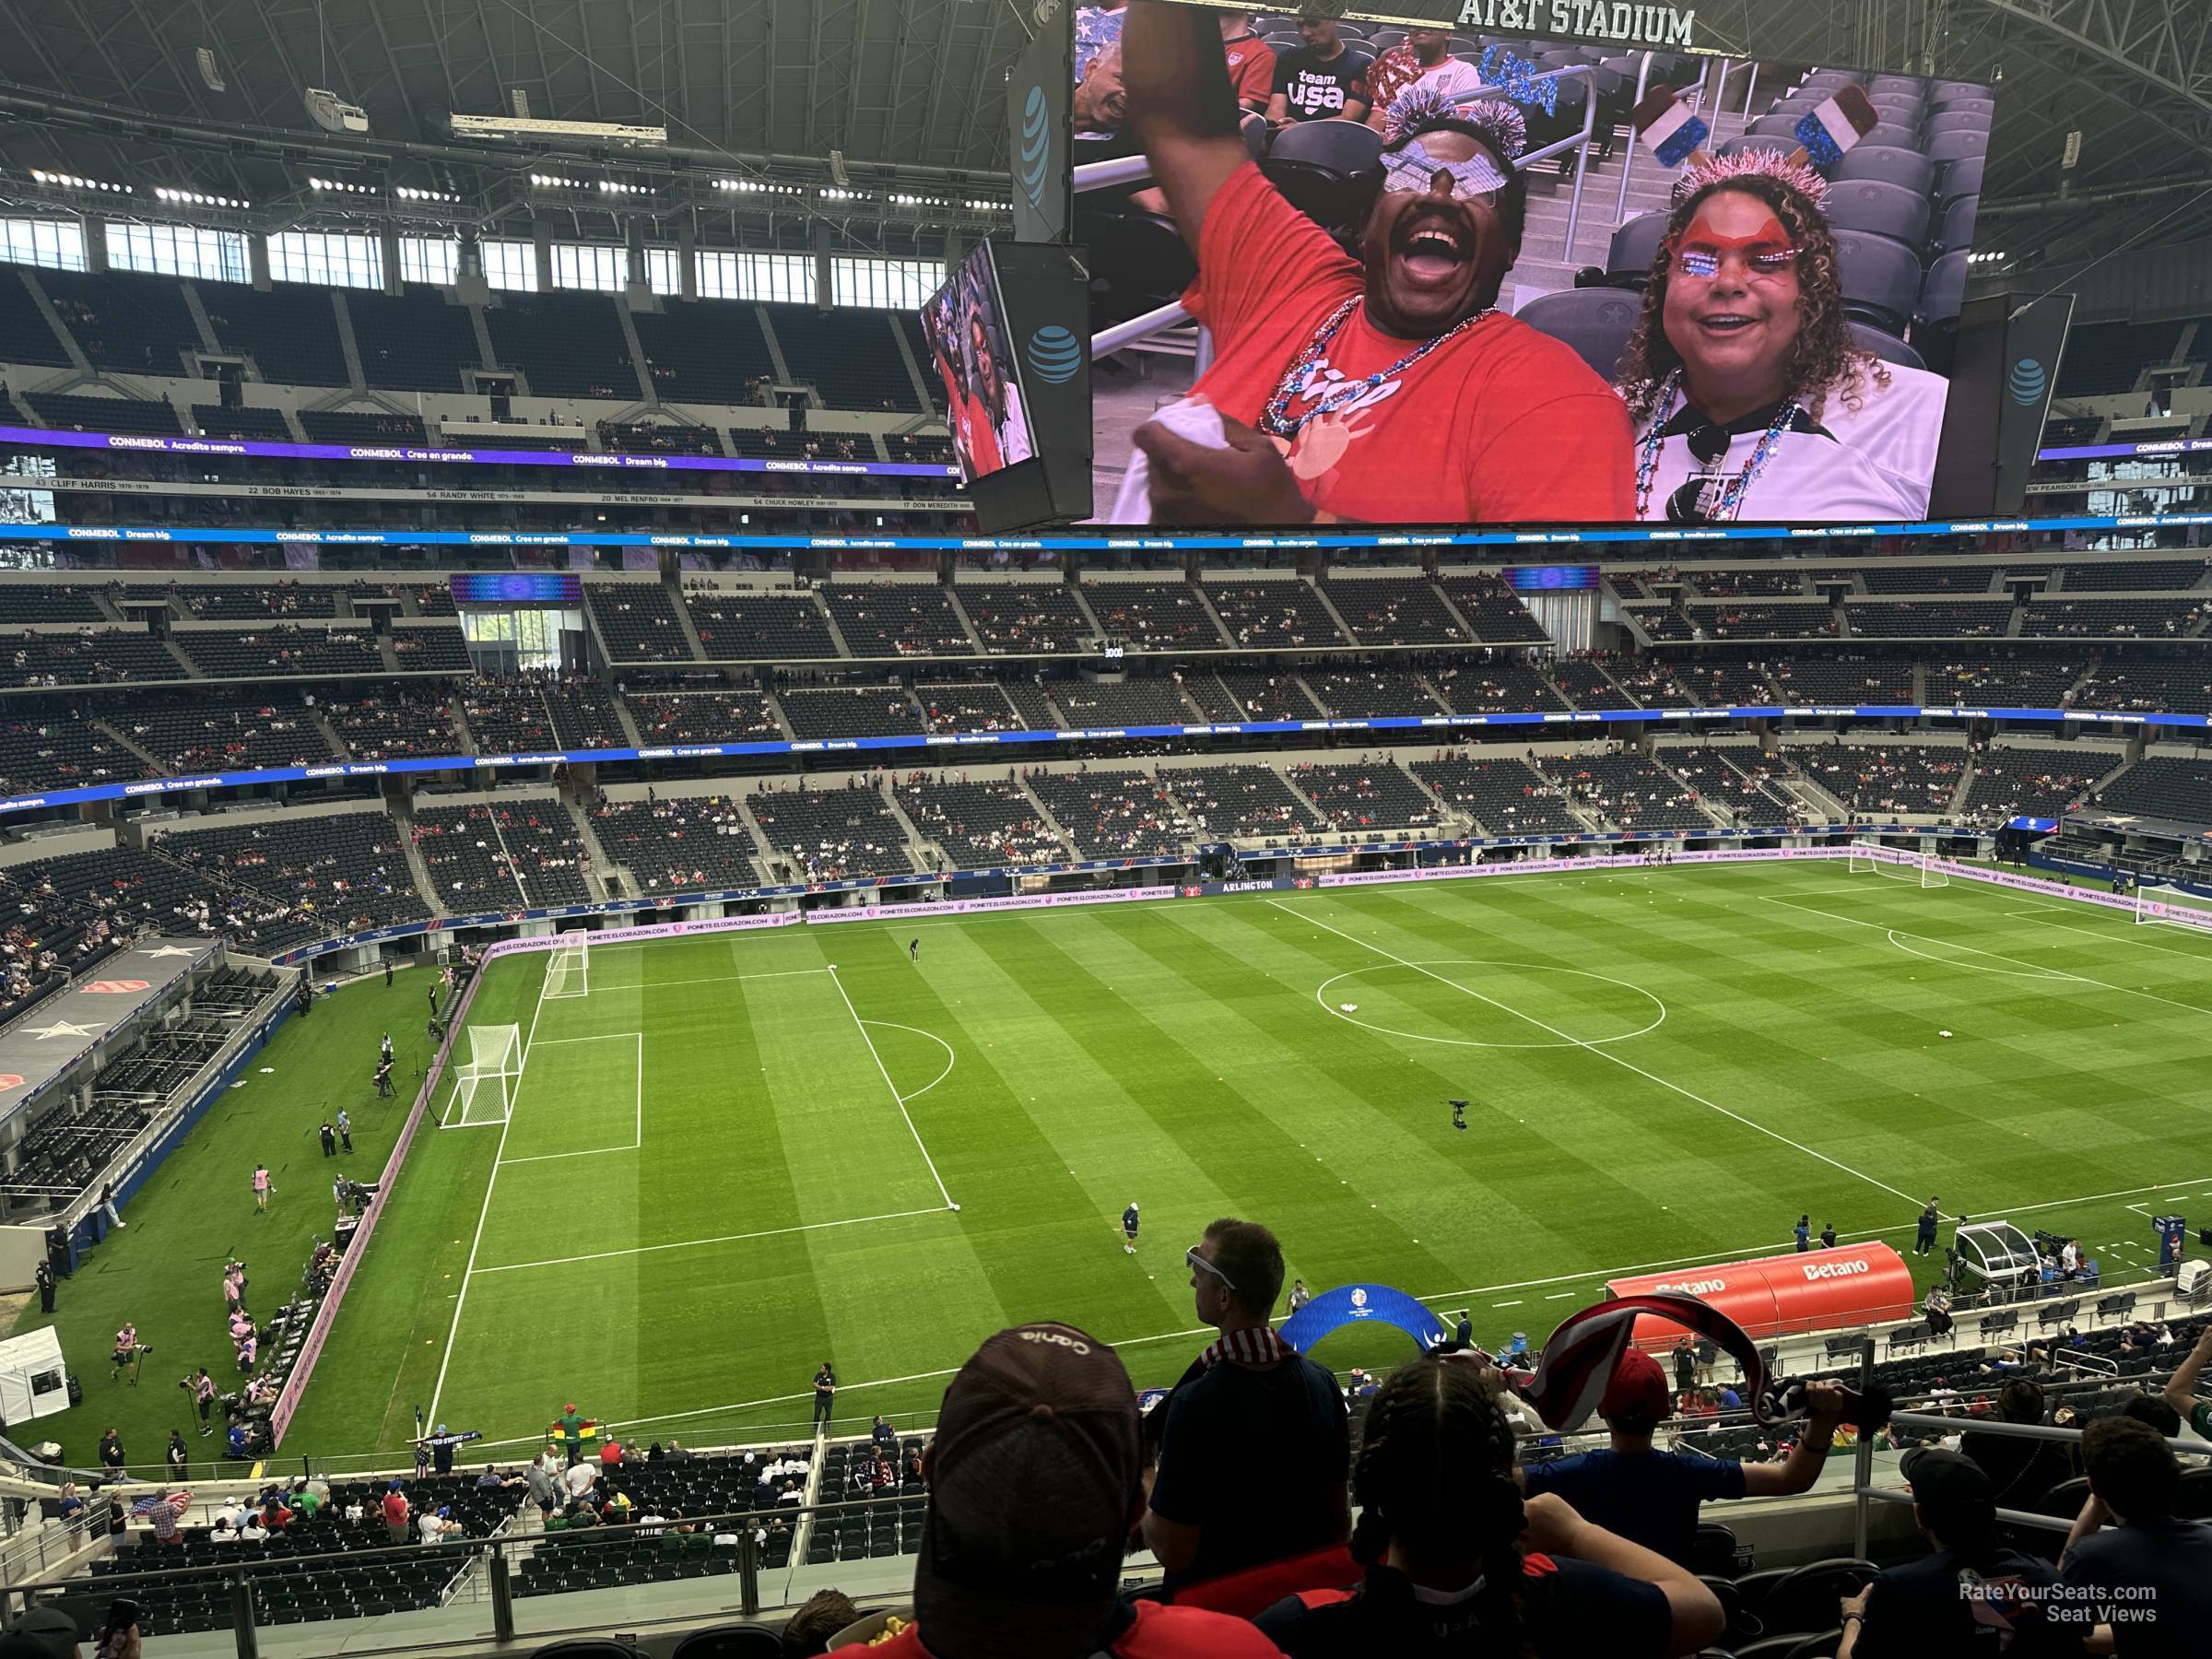 section c339, row 8 seat view  for soccer - at&t stadium (cowboys stadium)